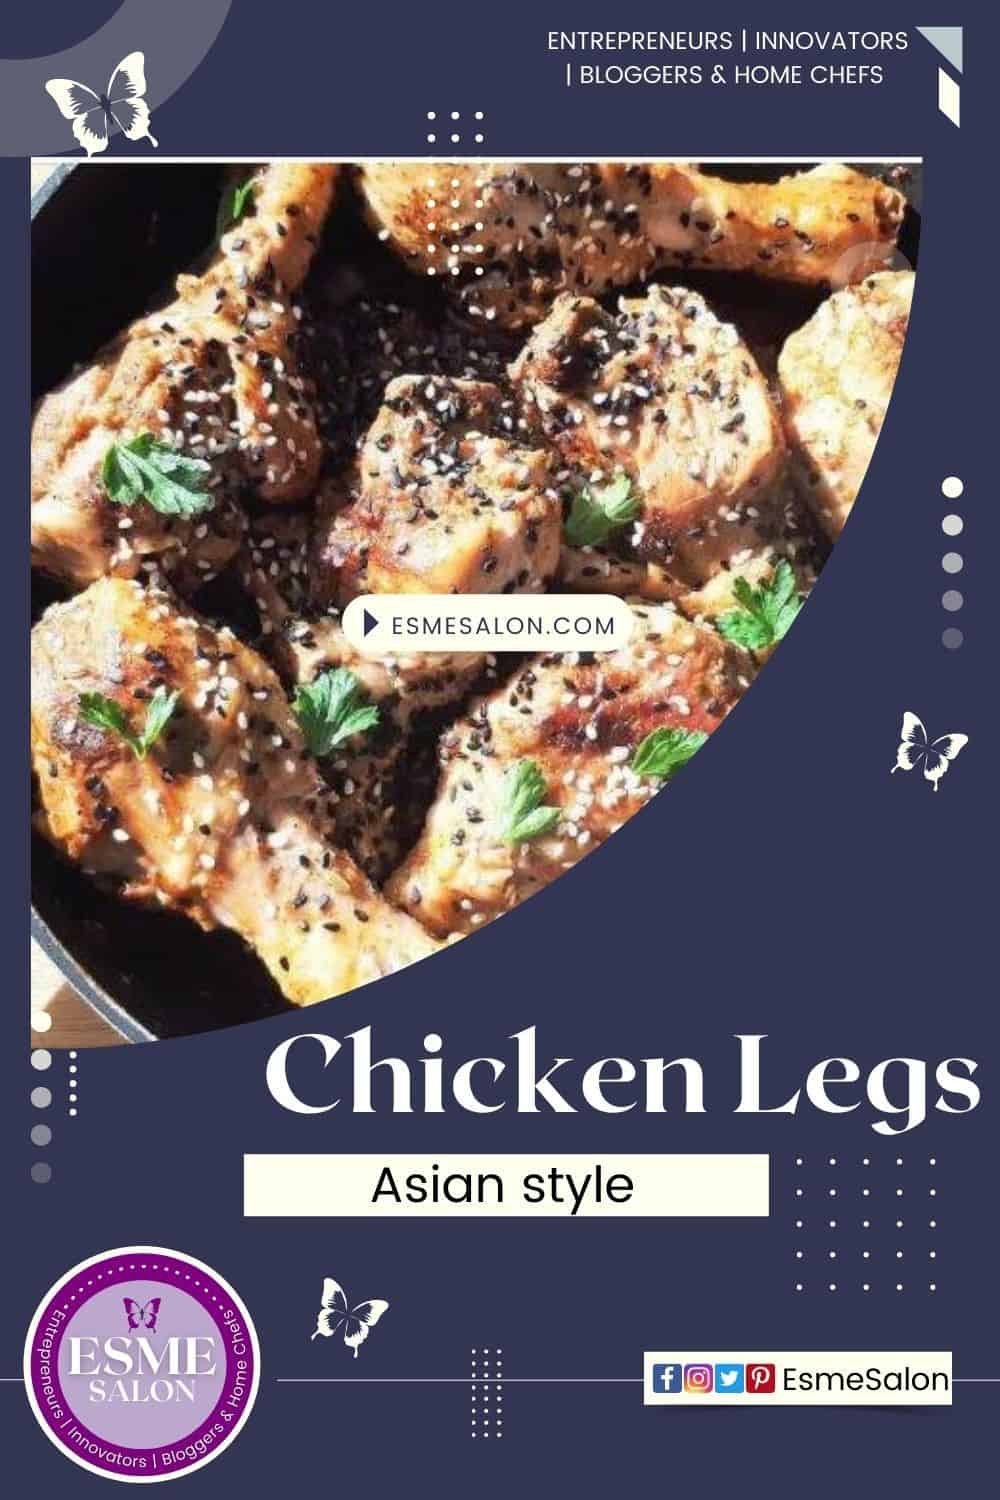 Chicken Legs prepared Asian Style and topped with sesame seed and parsley